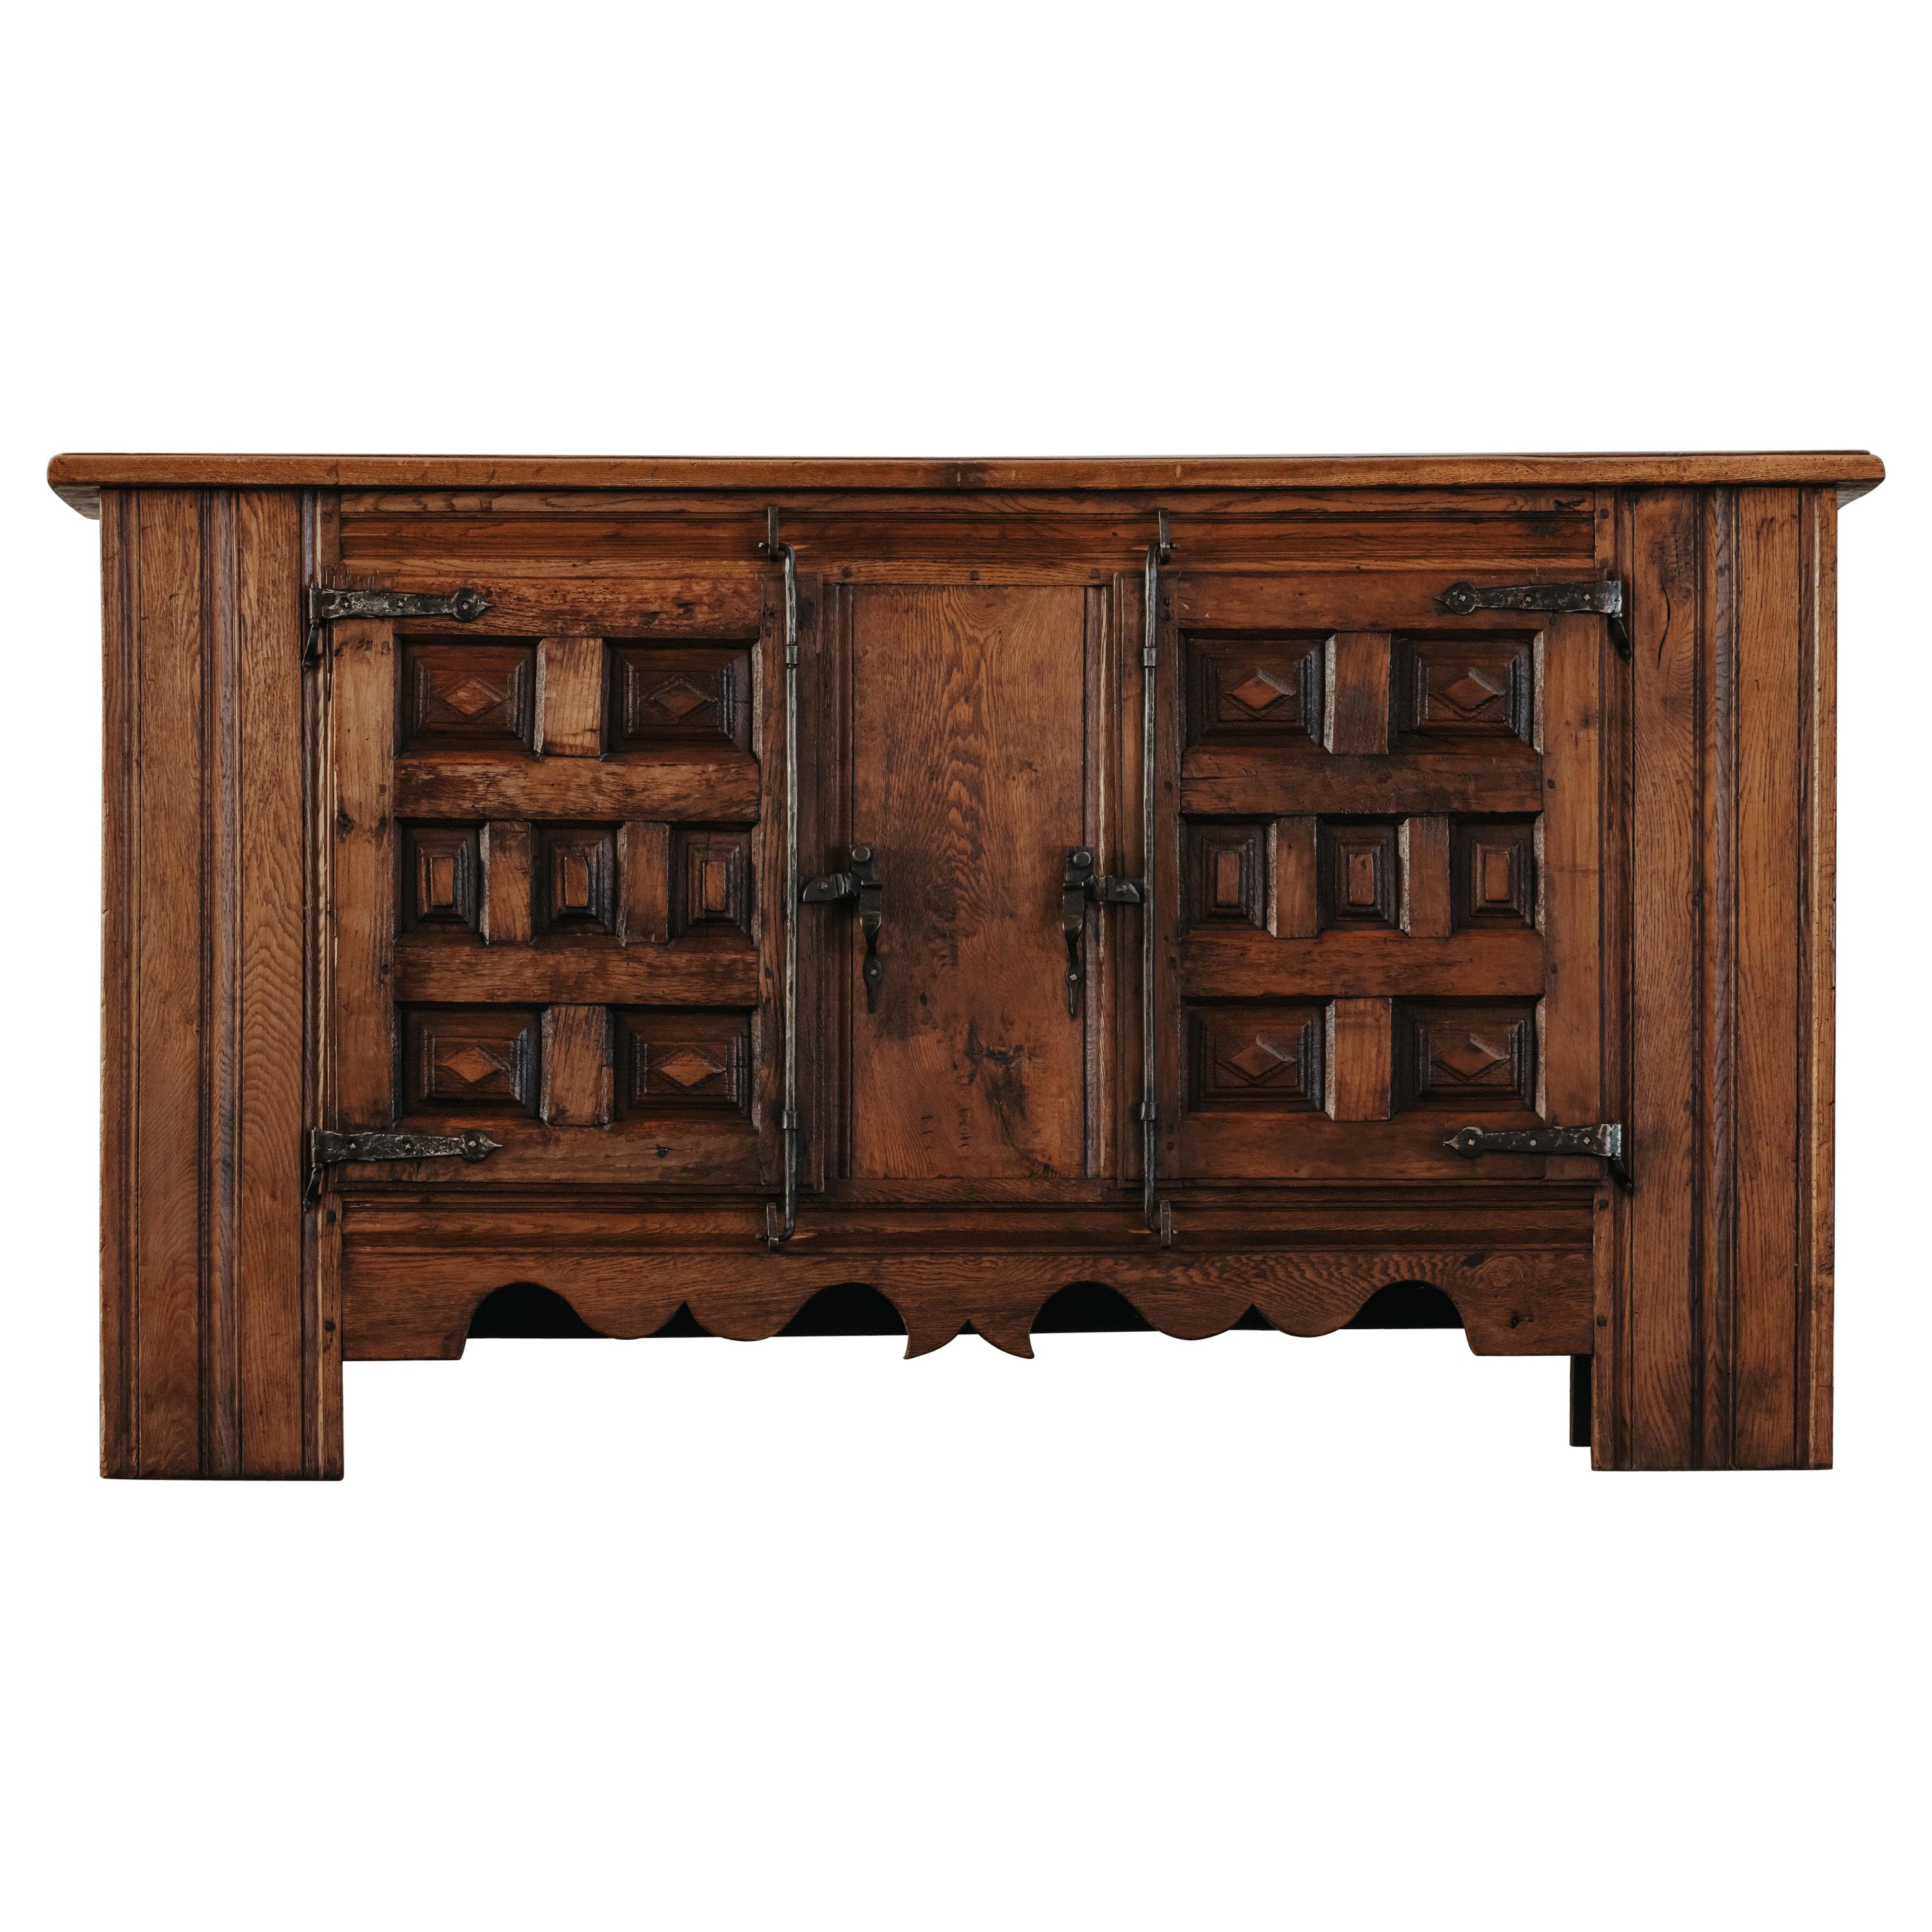 Early Oak Two Door Cabinet From Spain, Circa 1780 For Sale